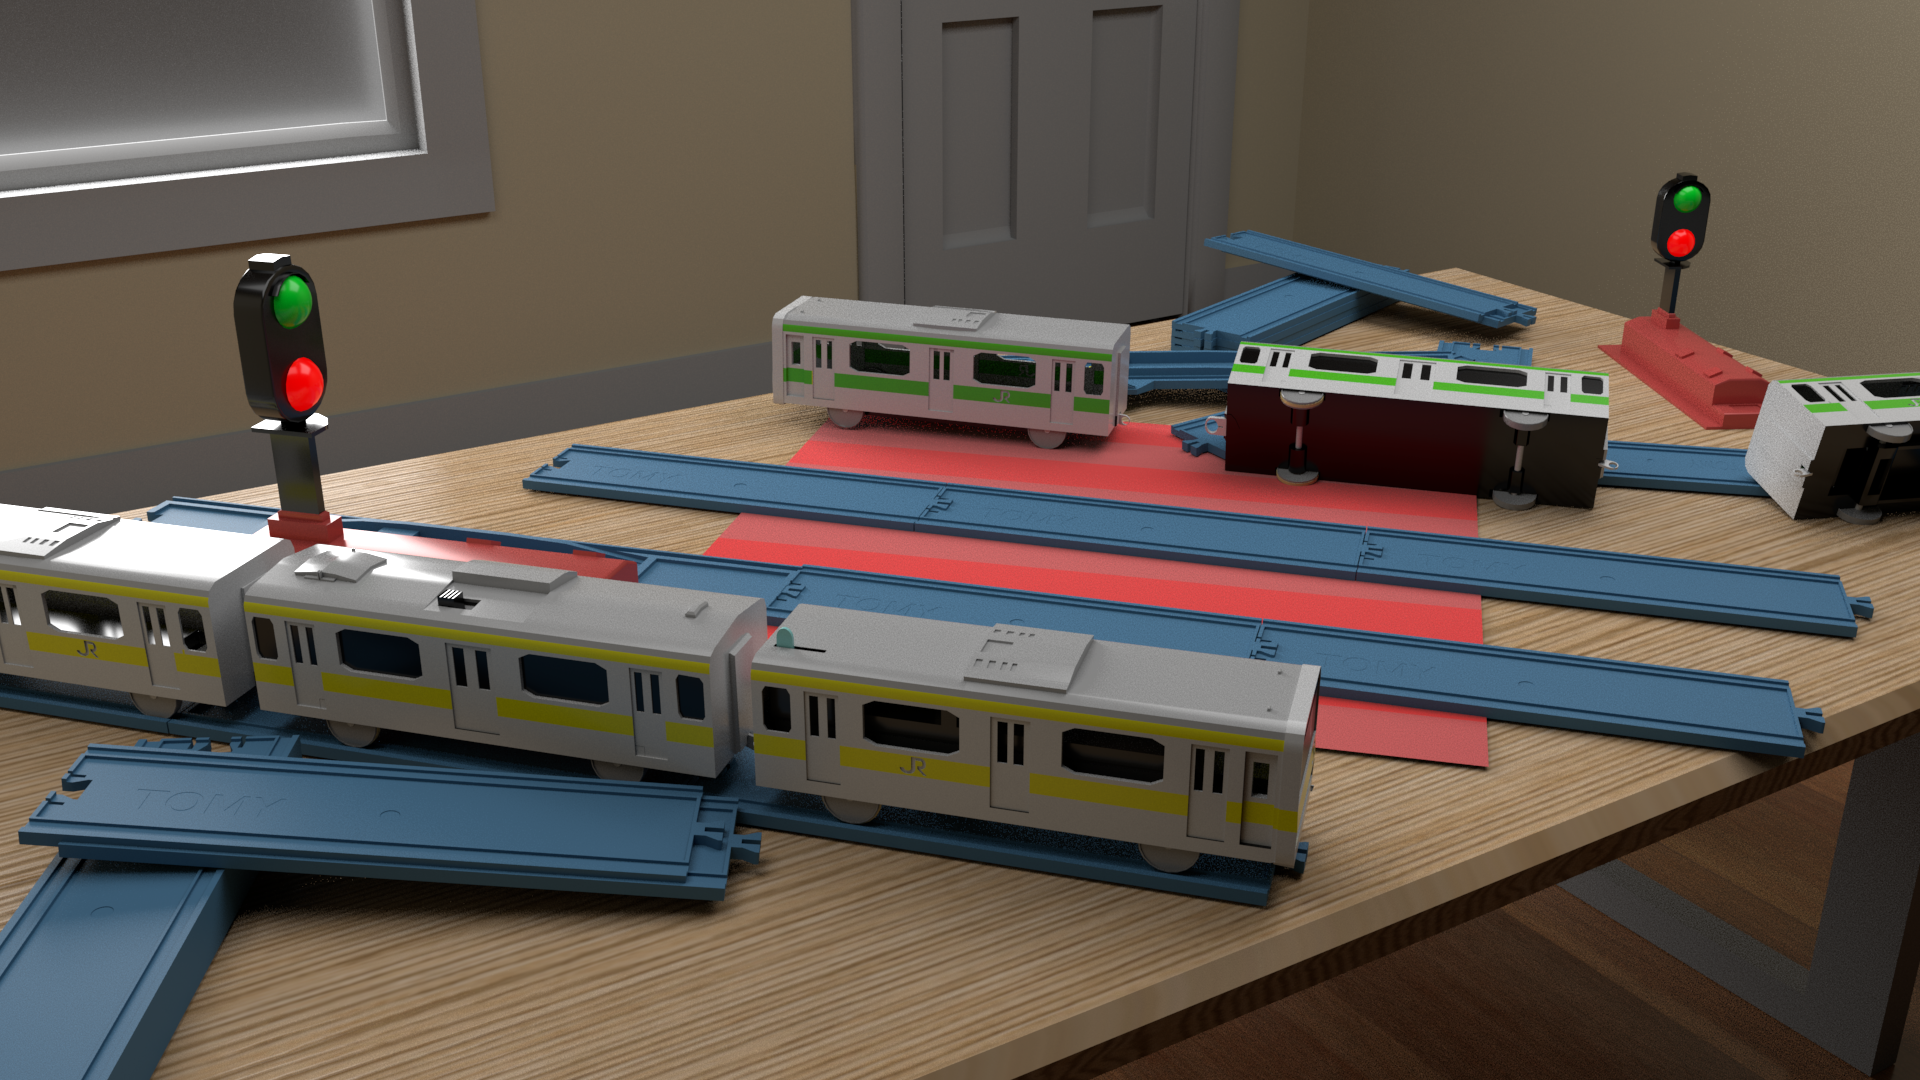 Rendered Image of Toy Train seet